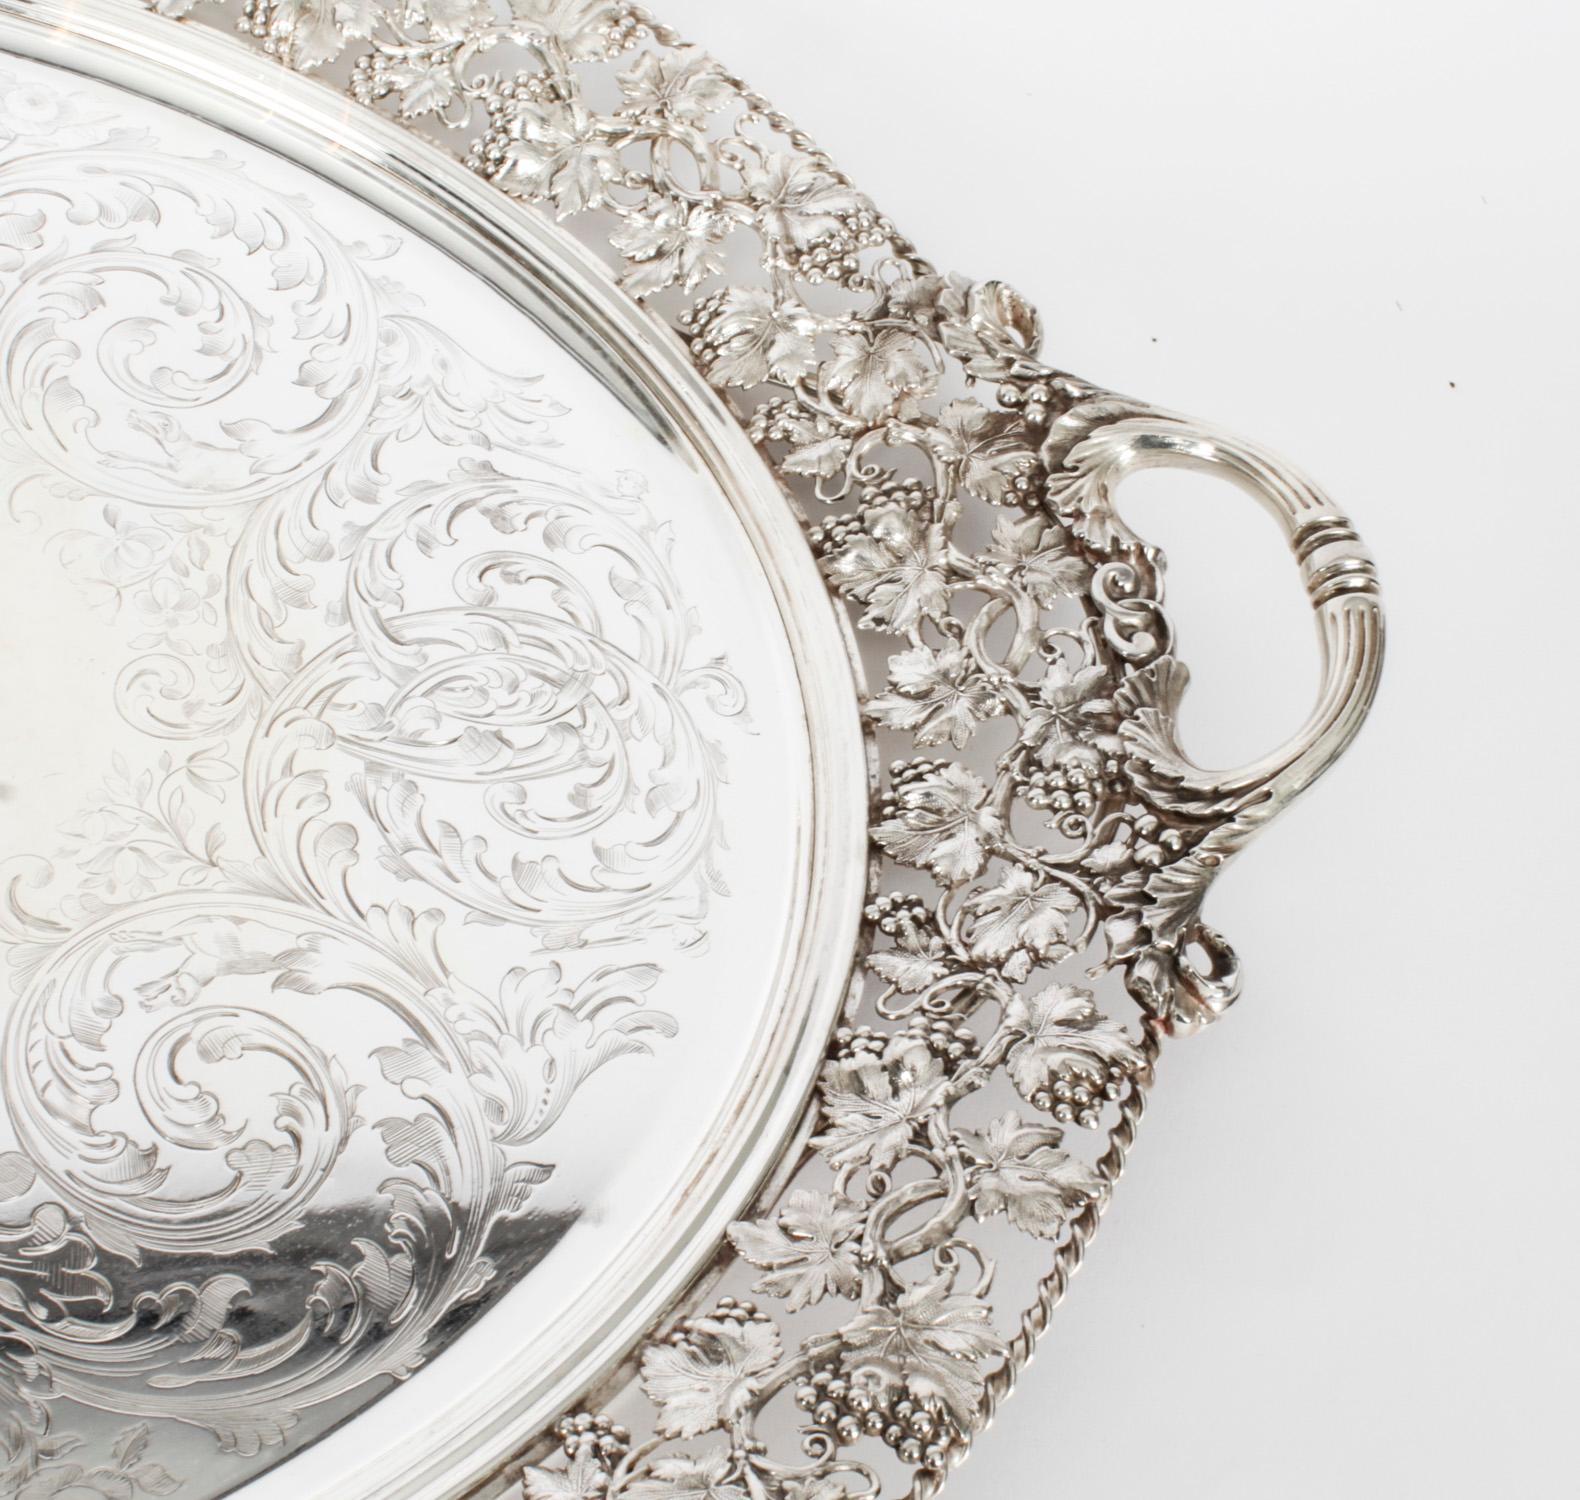 English Antique Monumental Victorian Oval Silver Plated Tray 19th Century For Sale